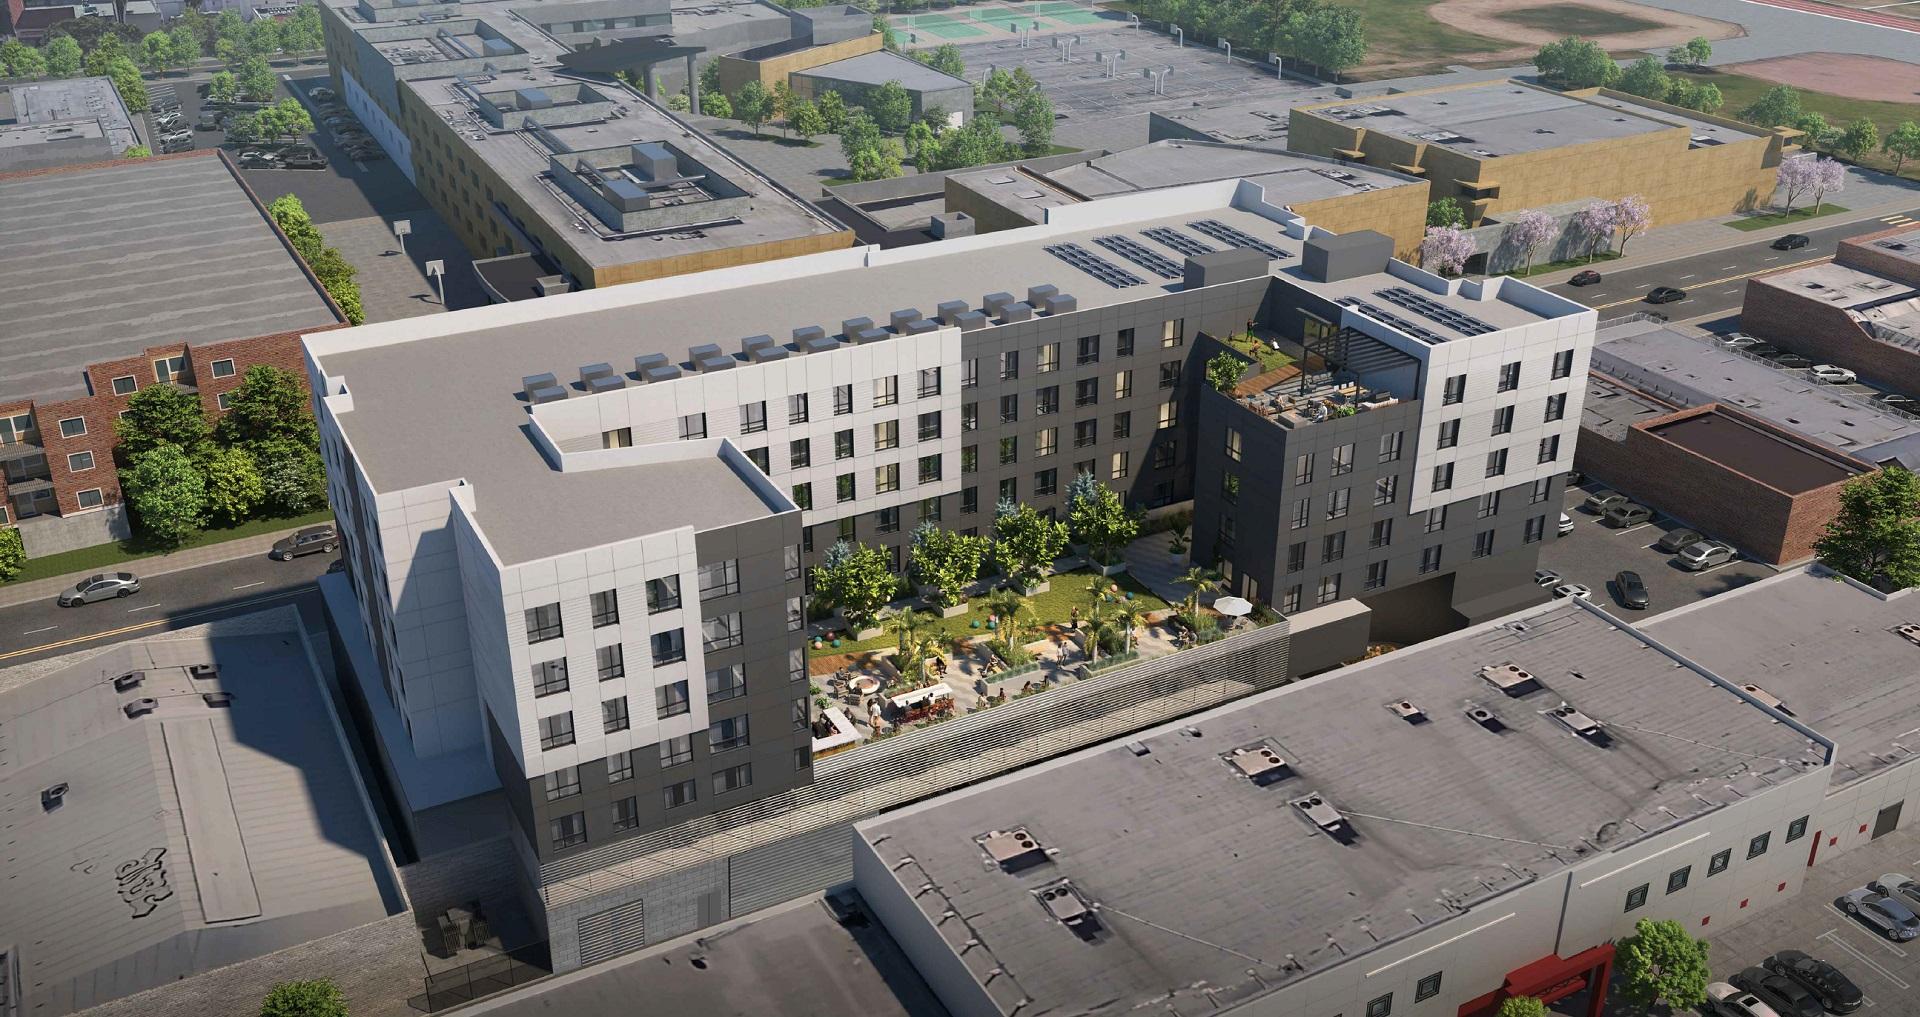 An aerial view of the rear of the new South Central Los Angeles multi-family residential project designed by Los Angeles multi-family residential architect AXIS/GFA